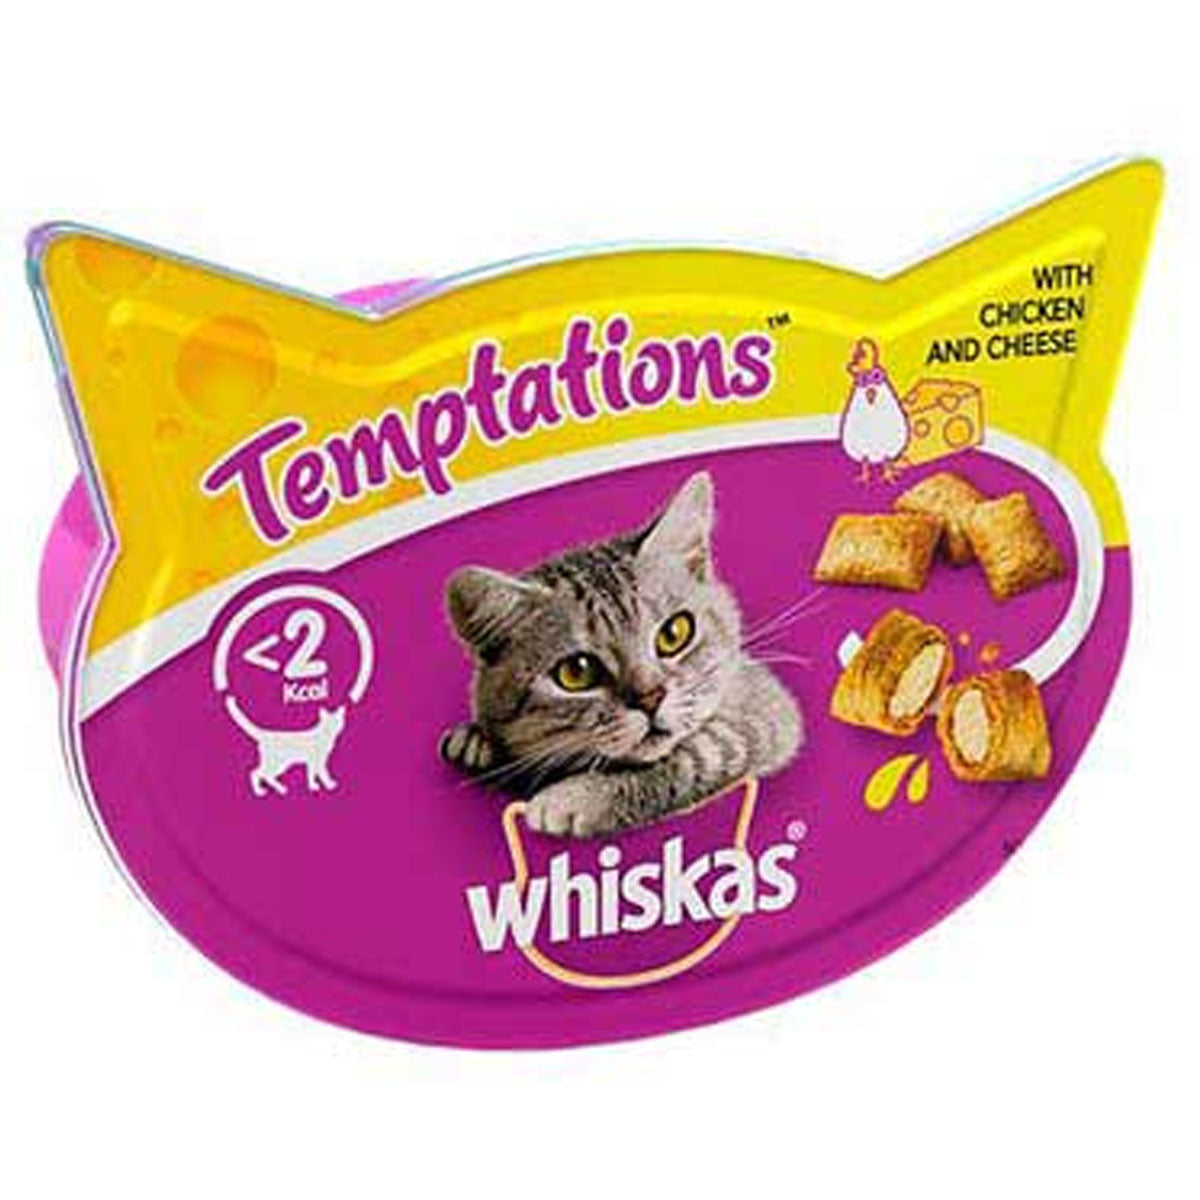 Whiskas - Temptations Chicken & Cheese - 60g - Continental Food Store